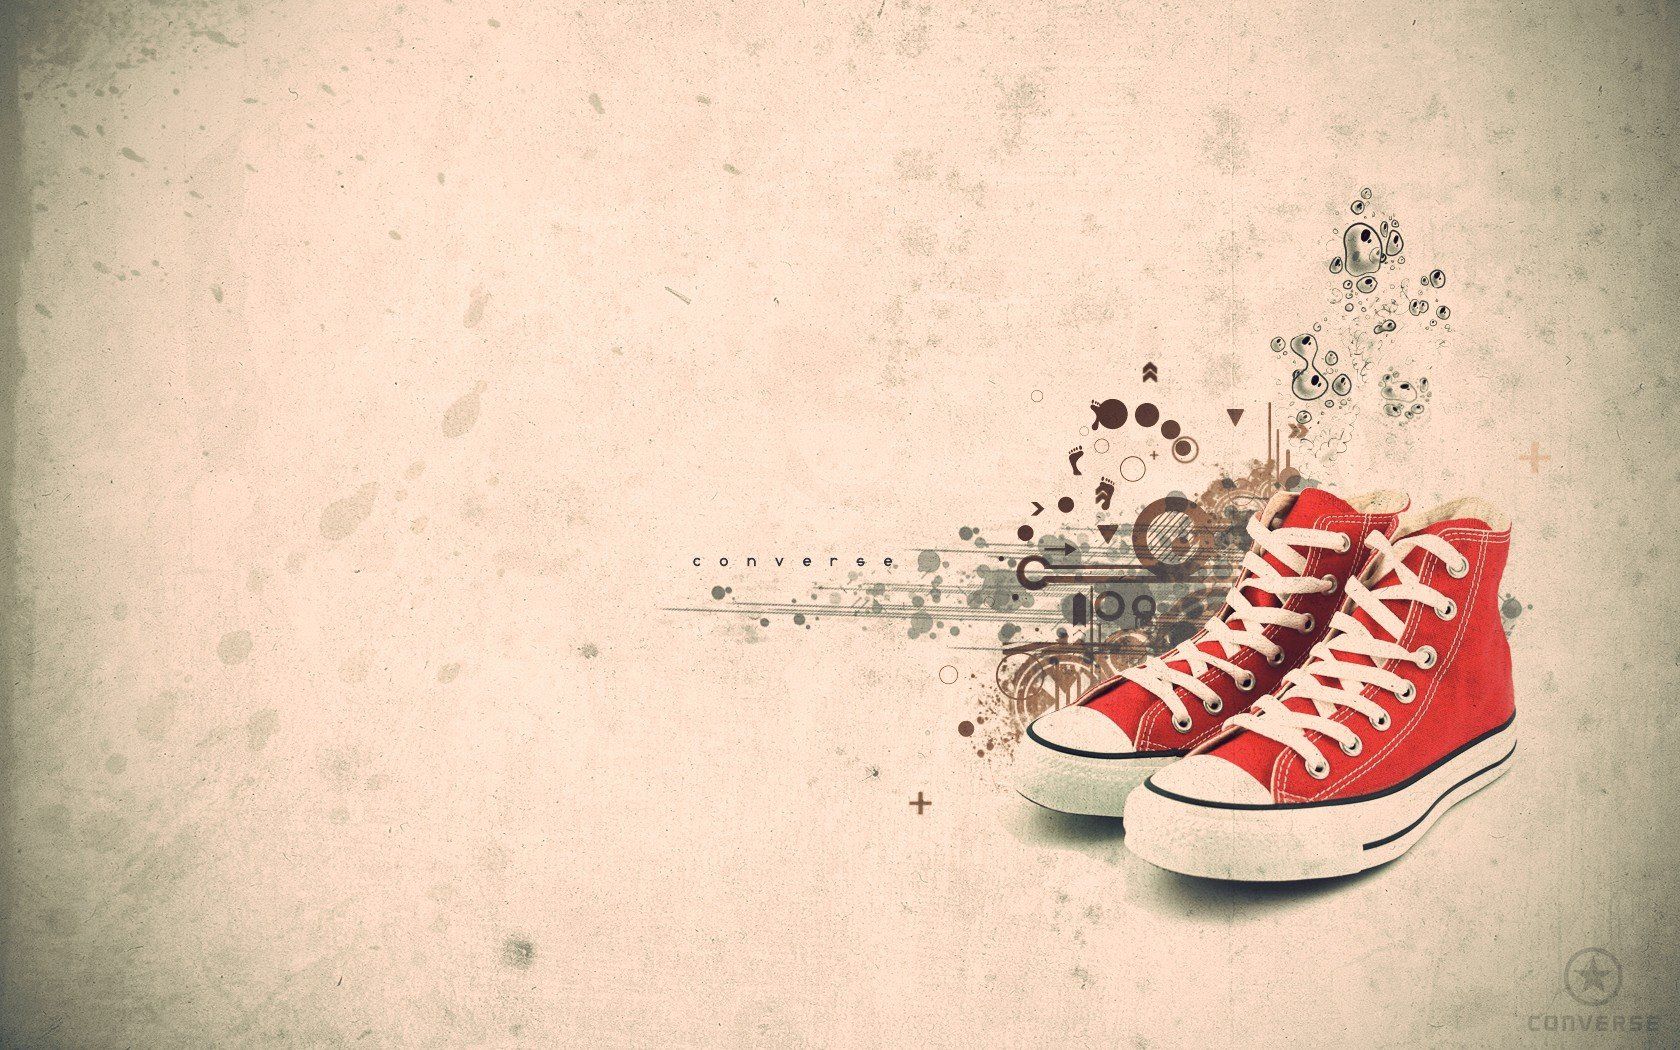 Converse all star wallpaper 1920x1200 for android 44 - Converse